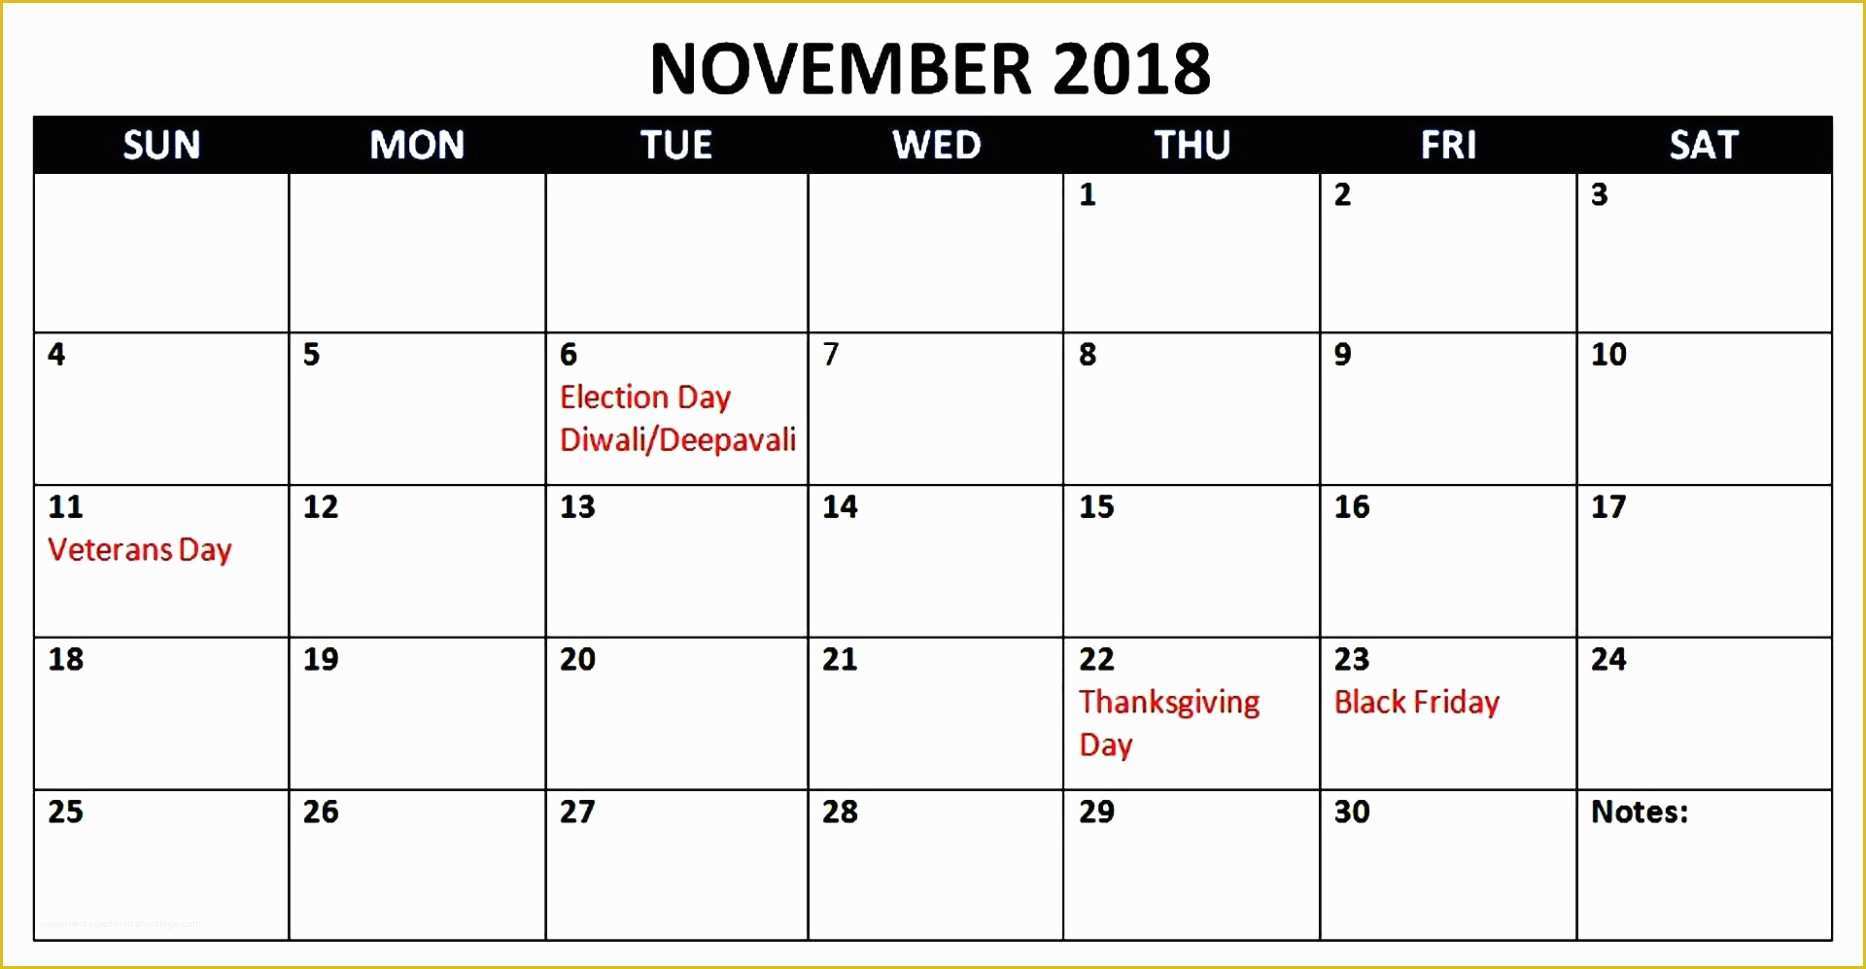 Holiday Schedule Template Free Of November 2018 Calendar with Holiday Templates